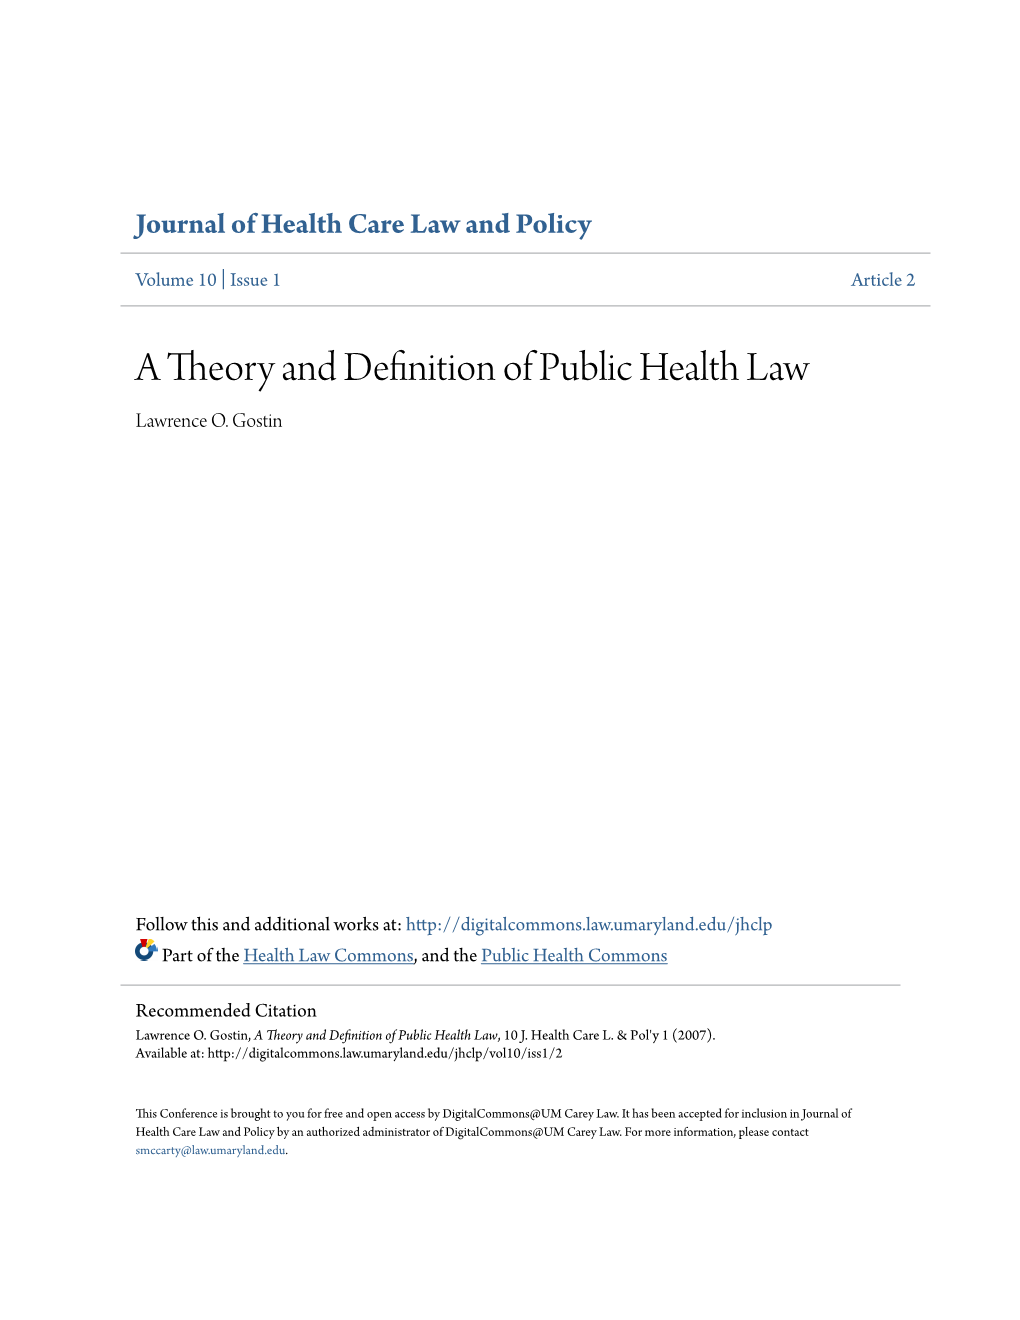 A Theory and Definition of Public Health Law Lawrence O